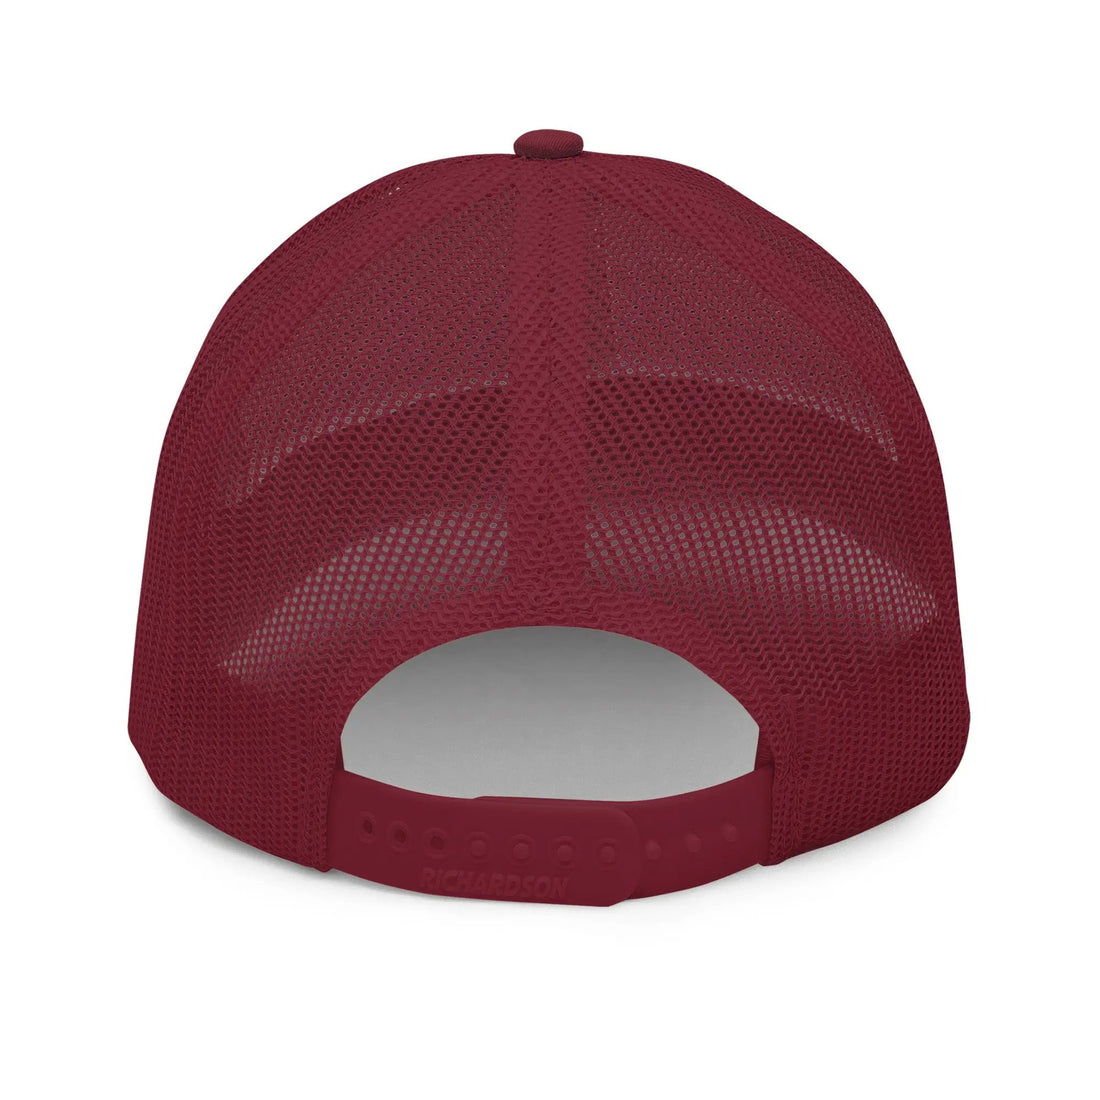 a red trucker hat with a white visor